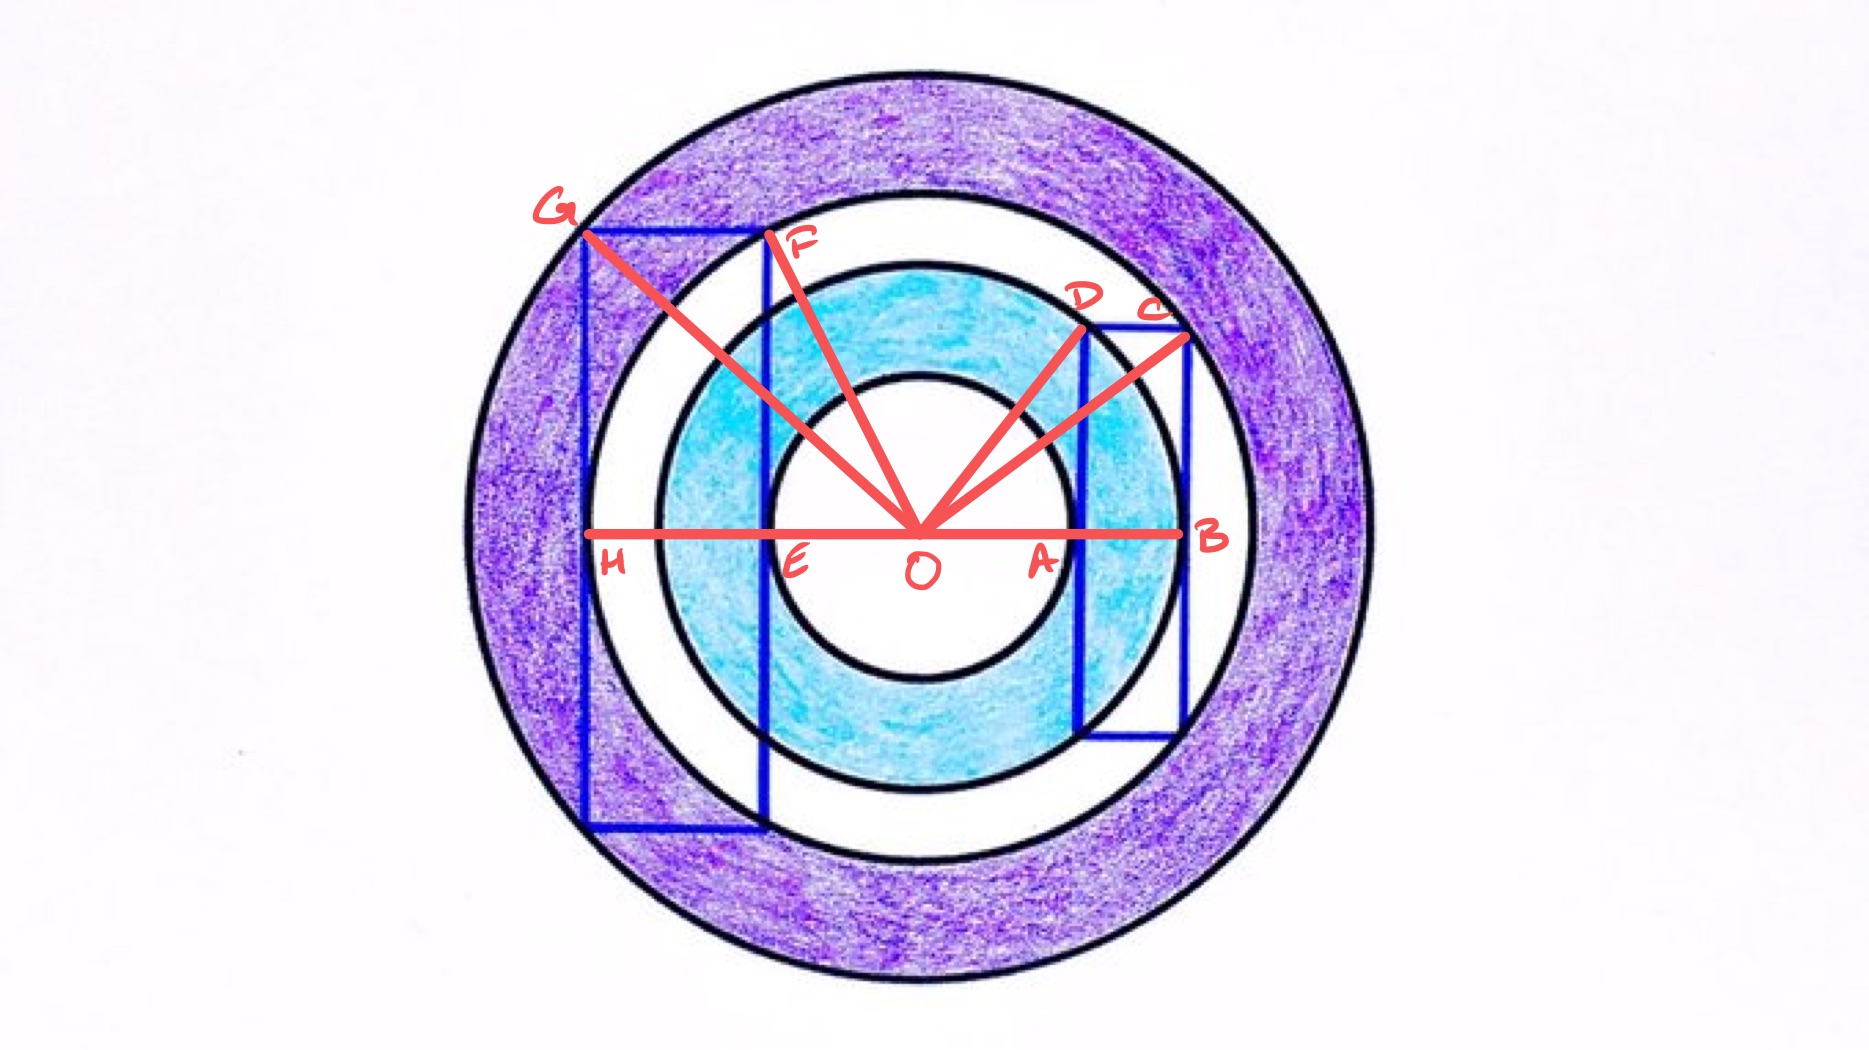 Rectangles in concentric rings labelled